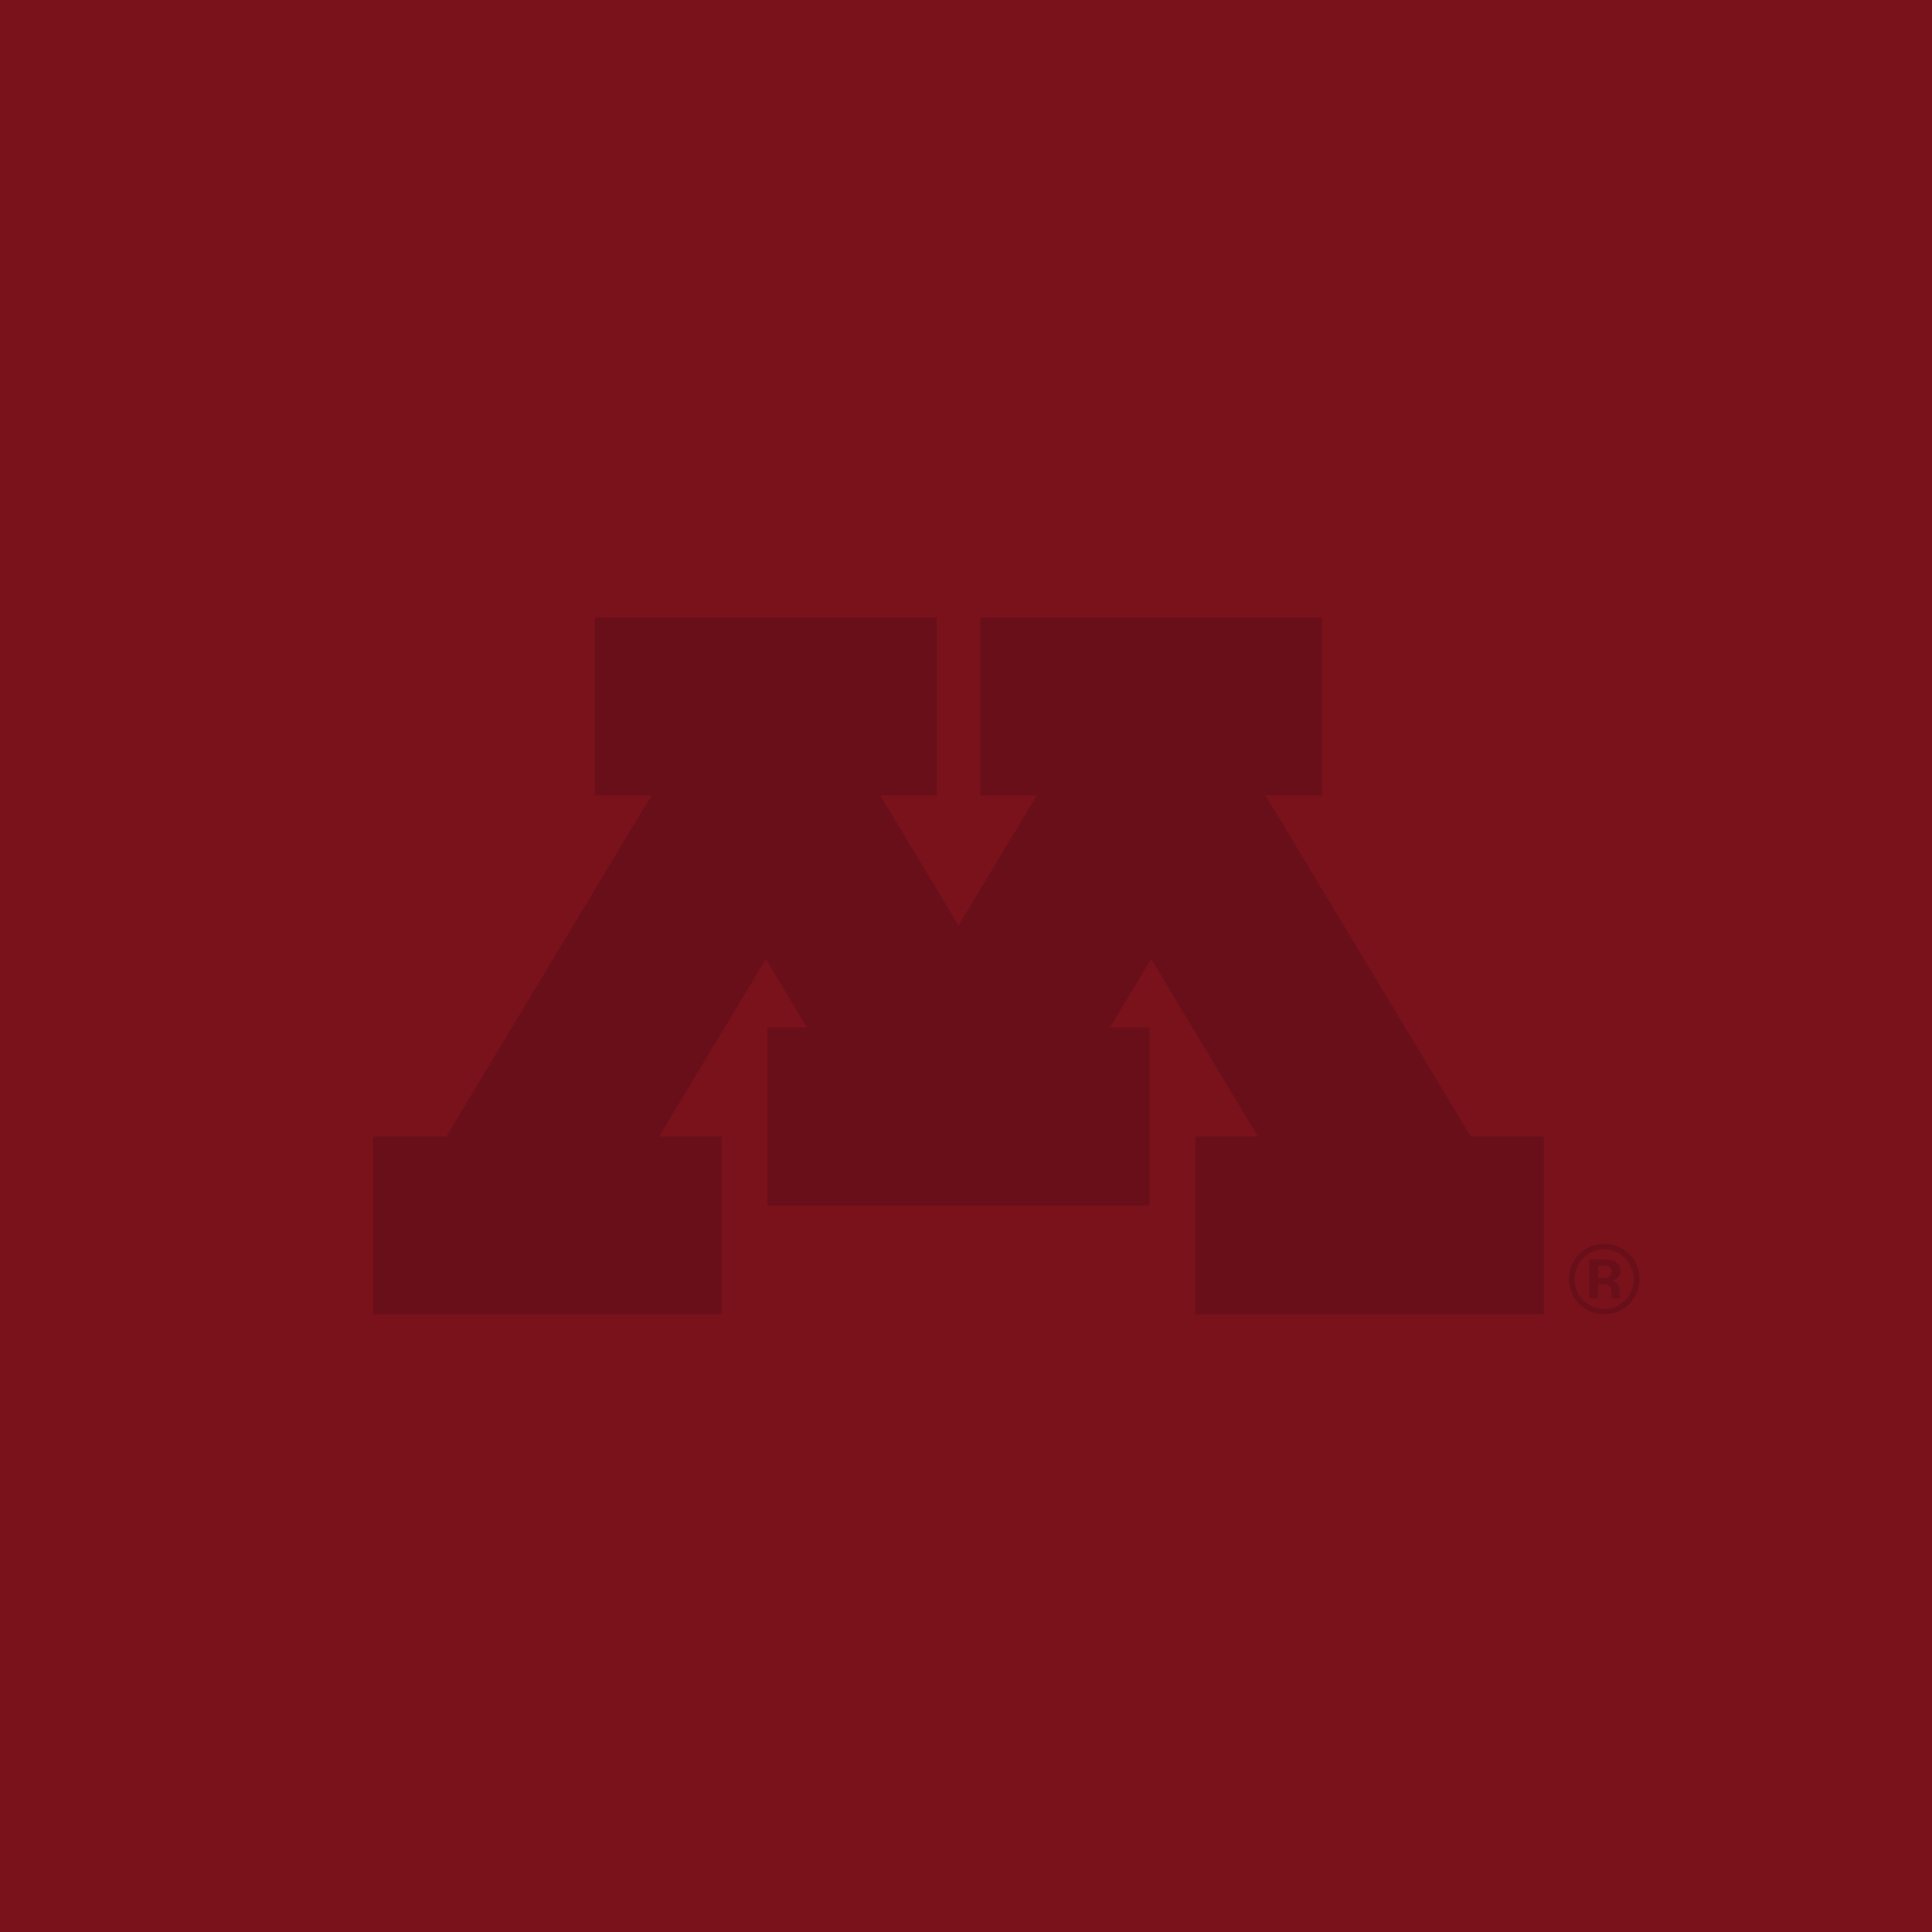 Maroon square with a slightly darker M logo in the middle